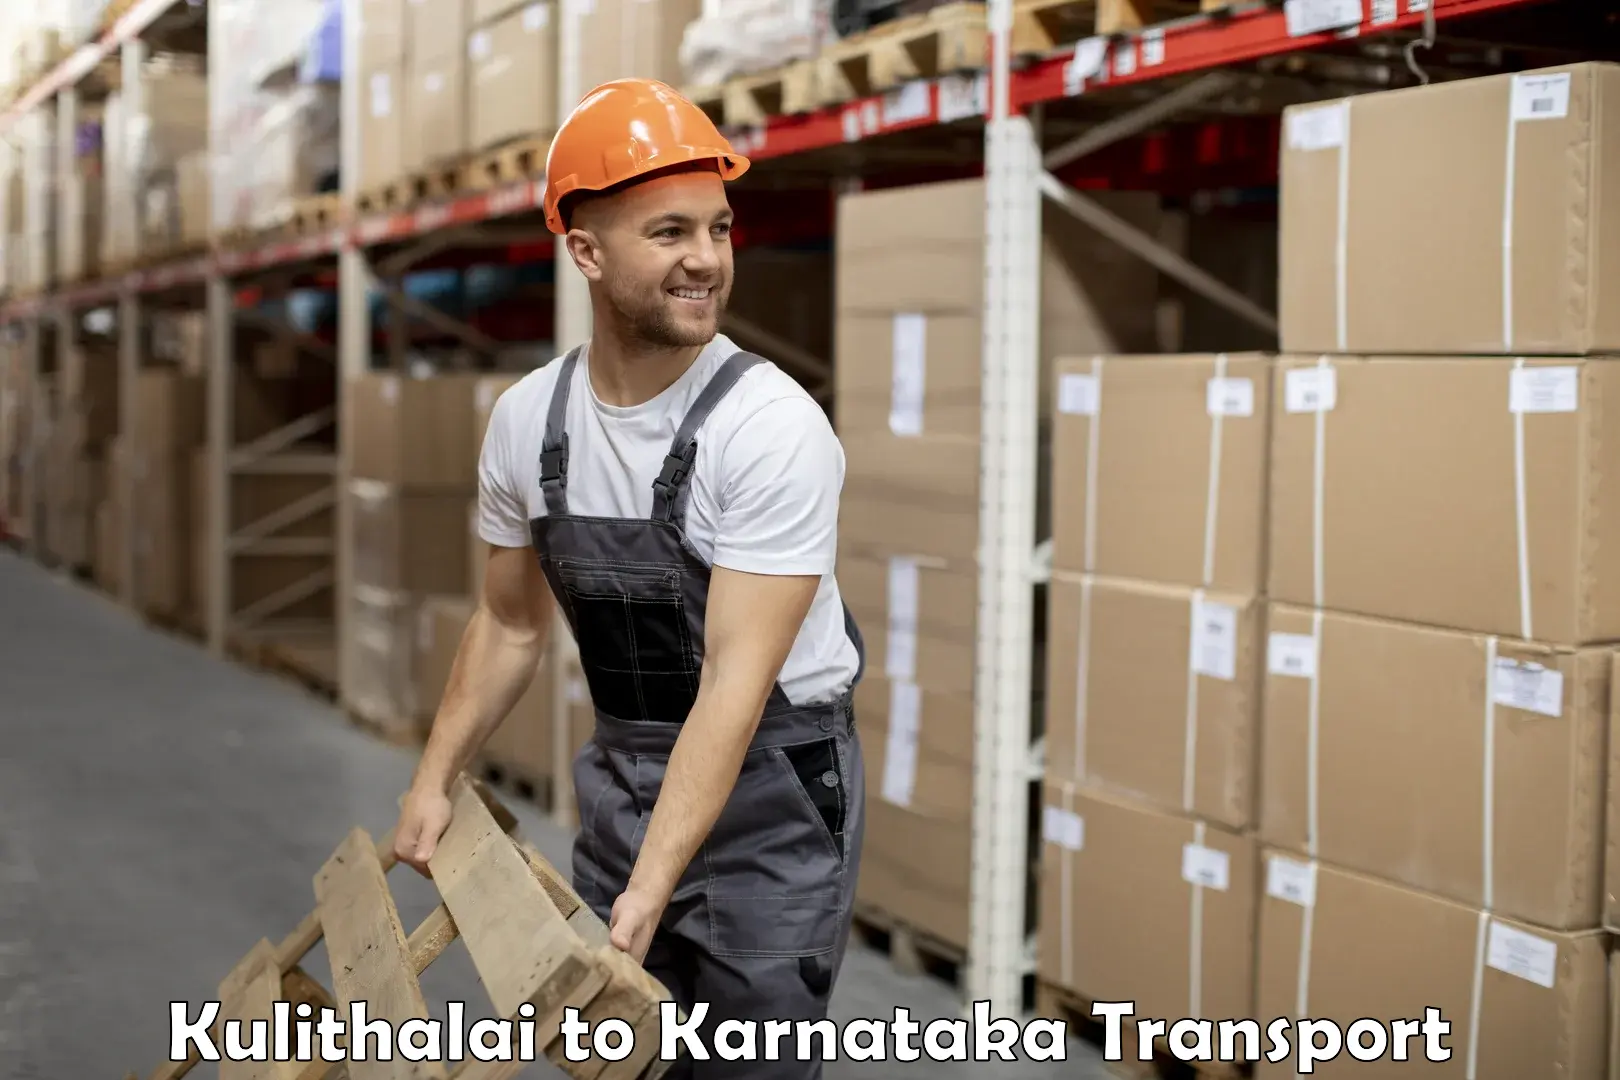 International cargo transportation services Kulithalai to Manipal Academy of Higher Education